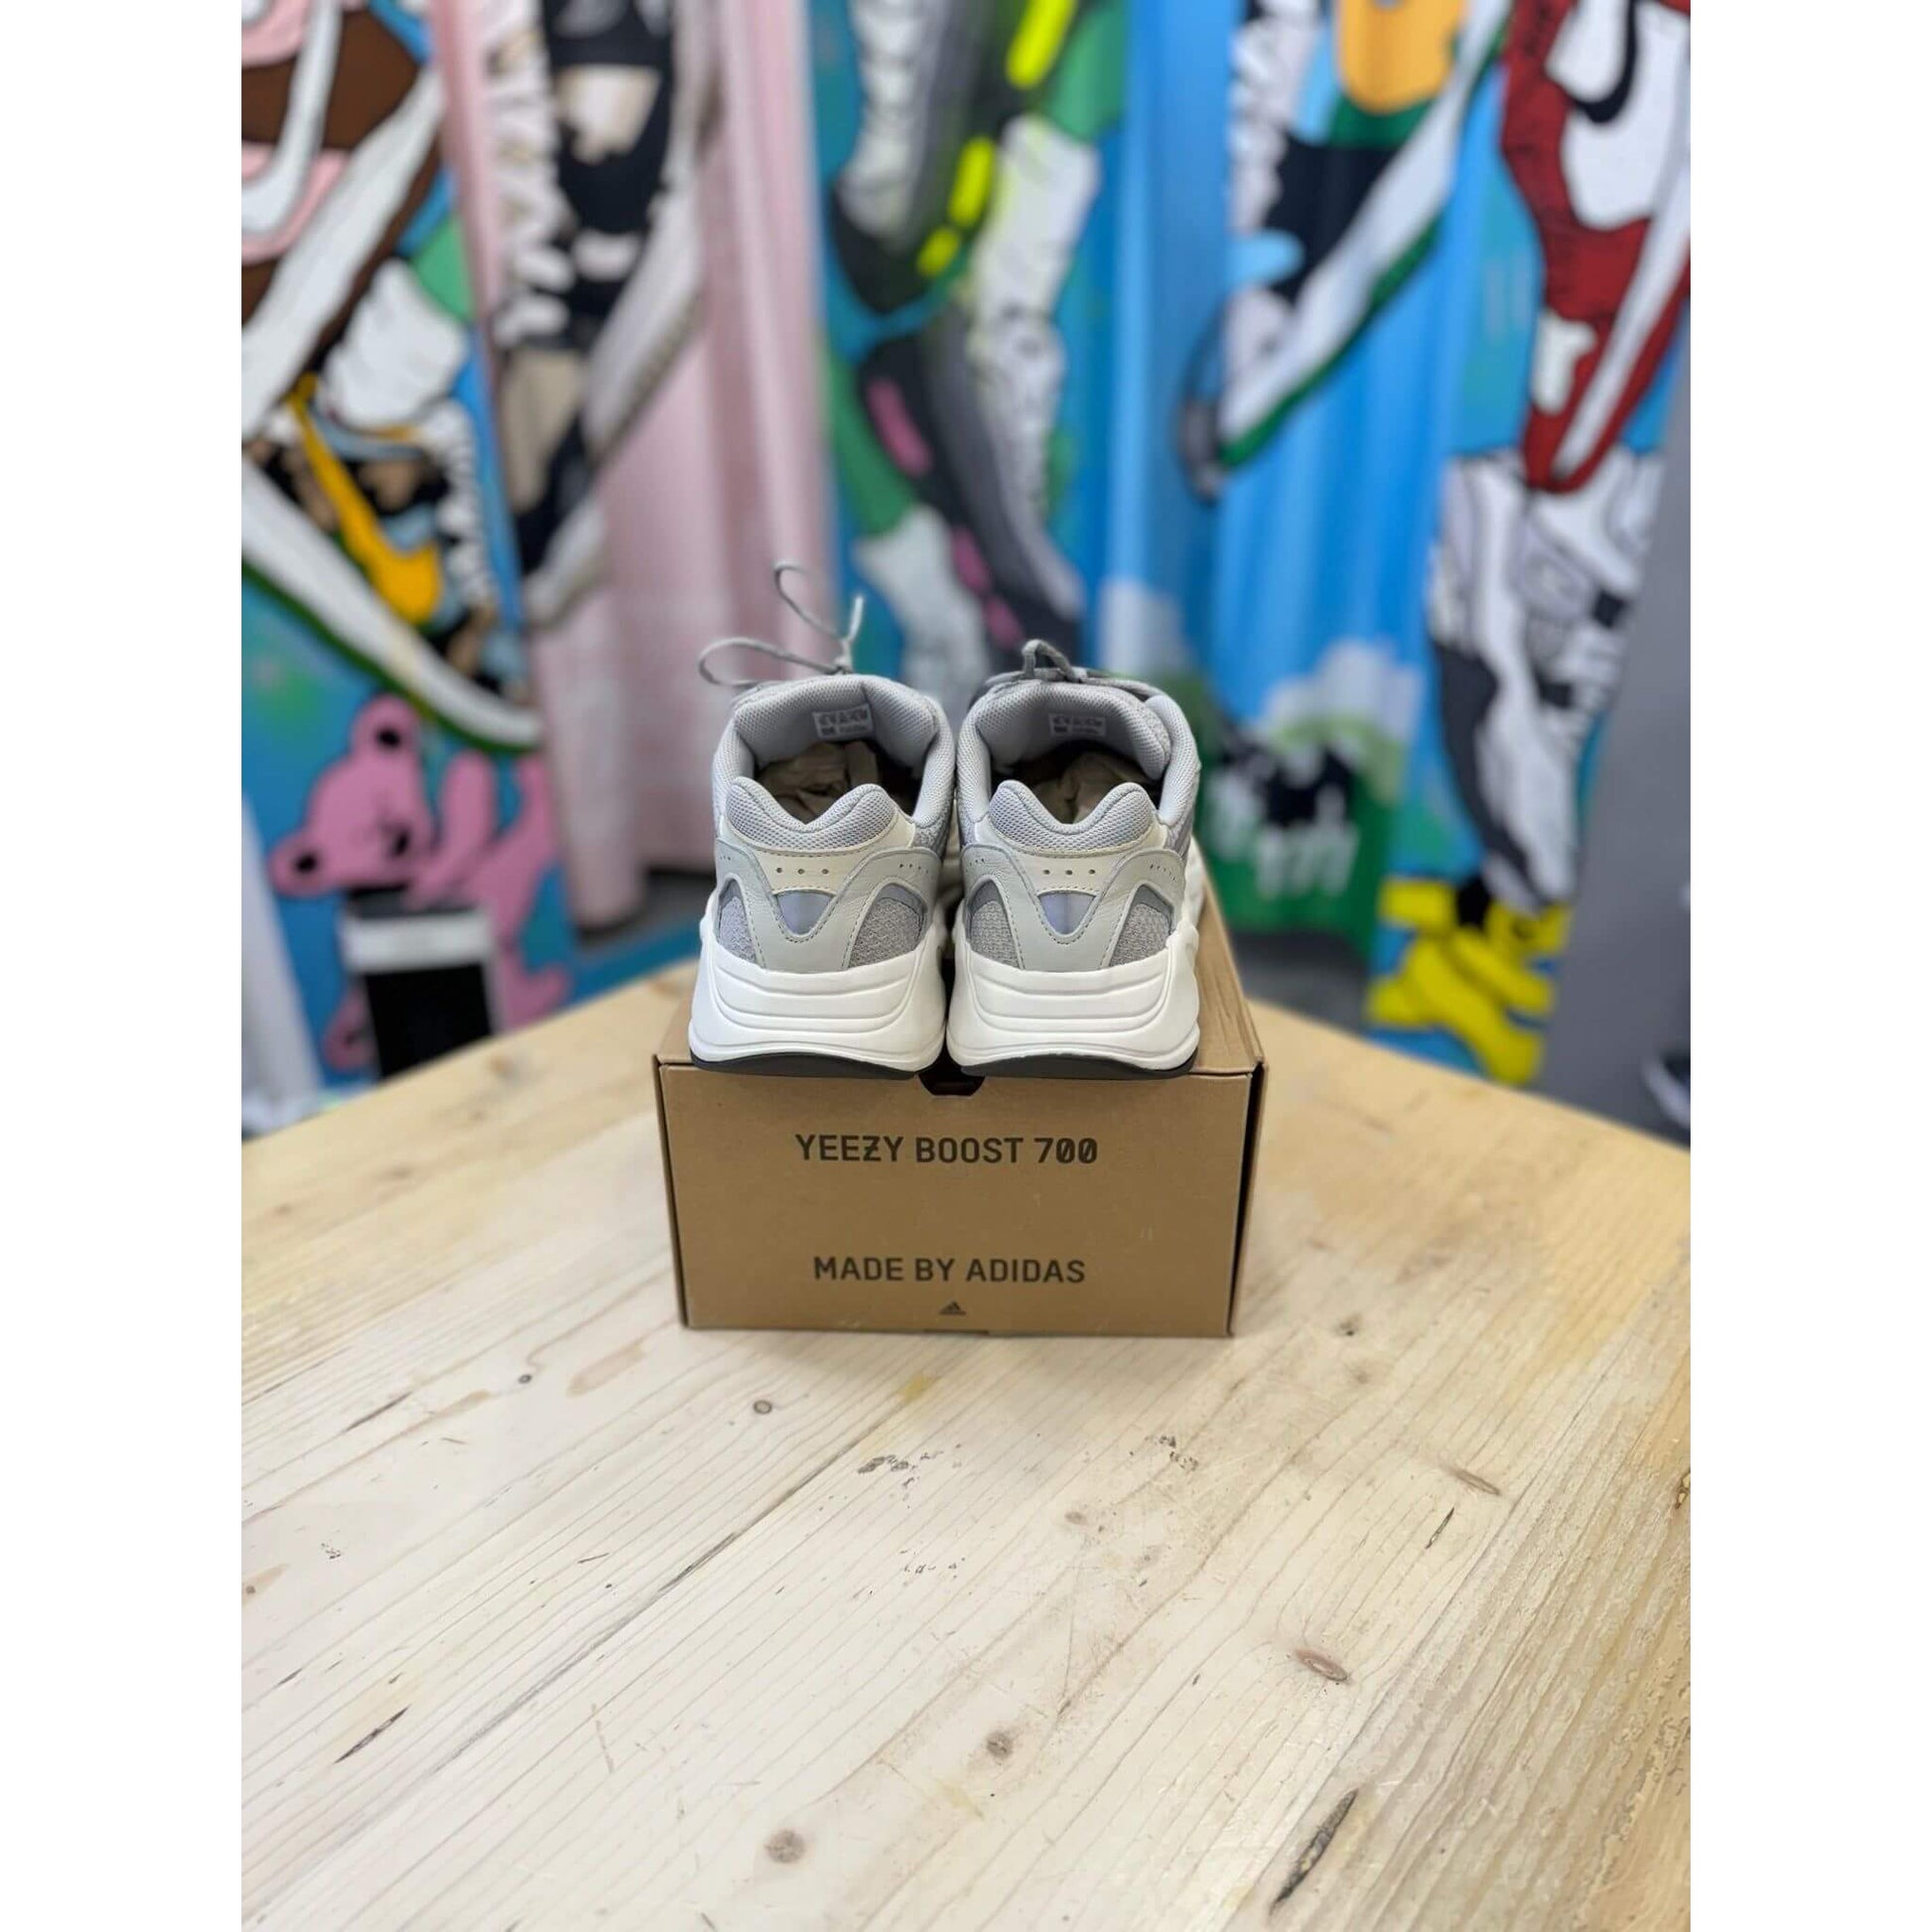 Adidas Yeezy Boost 700 V2 Cream UK 13 by Yeezy from £200.00